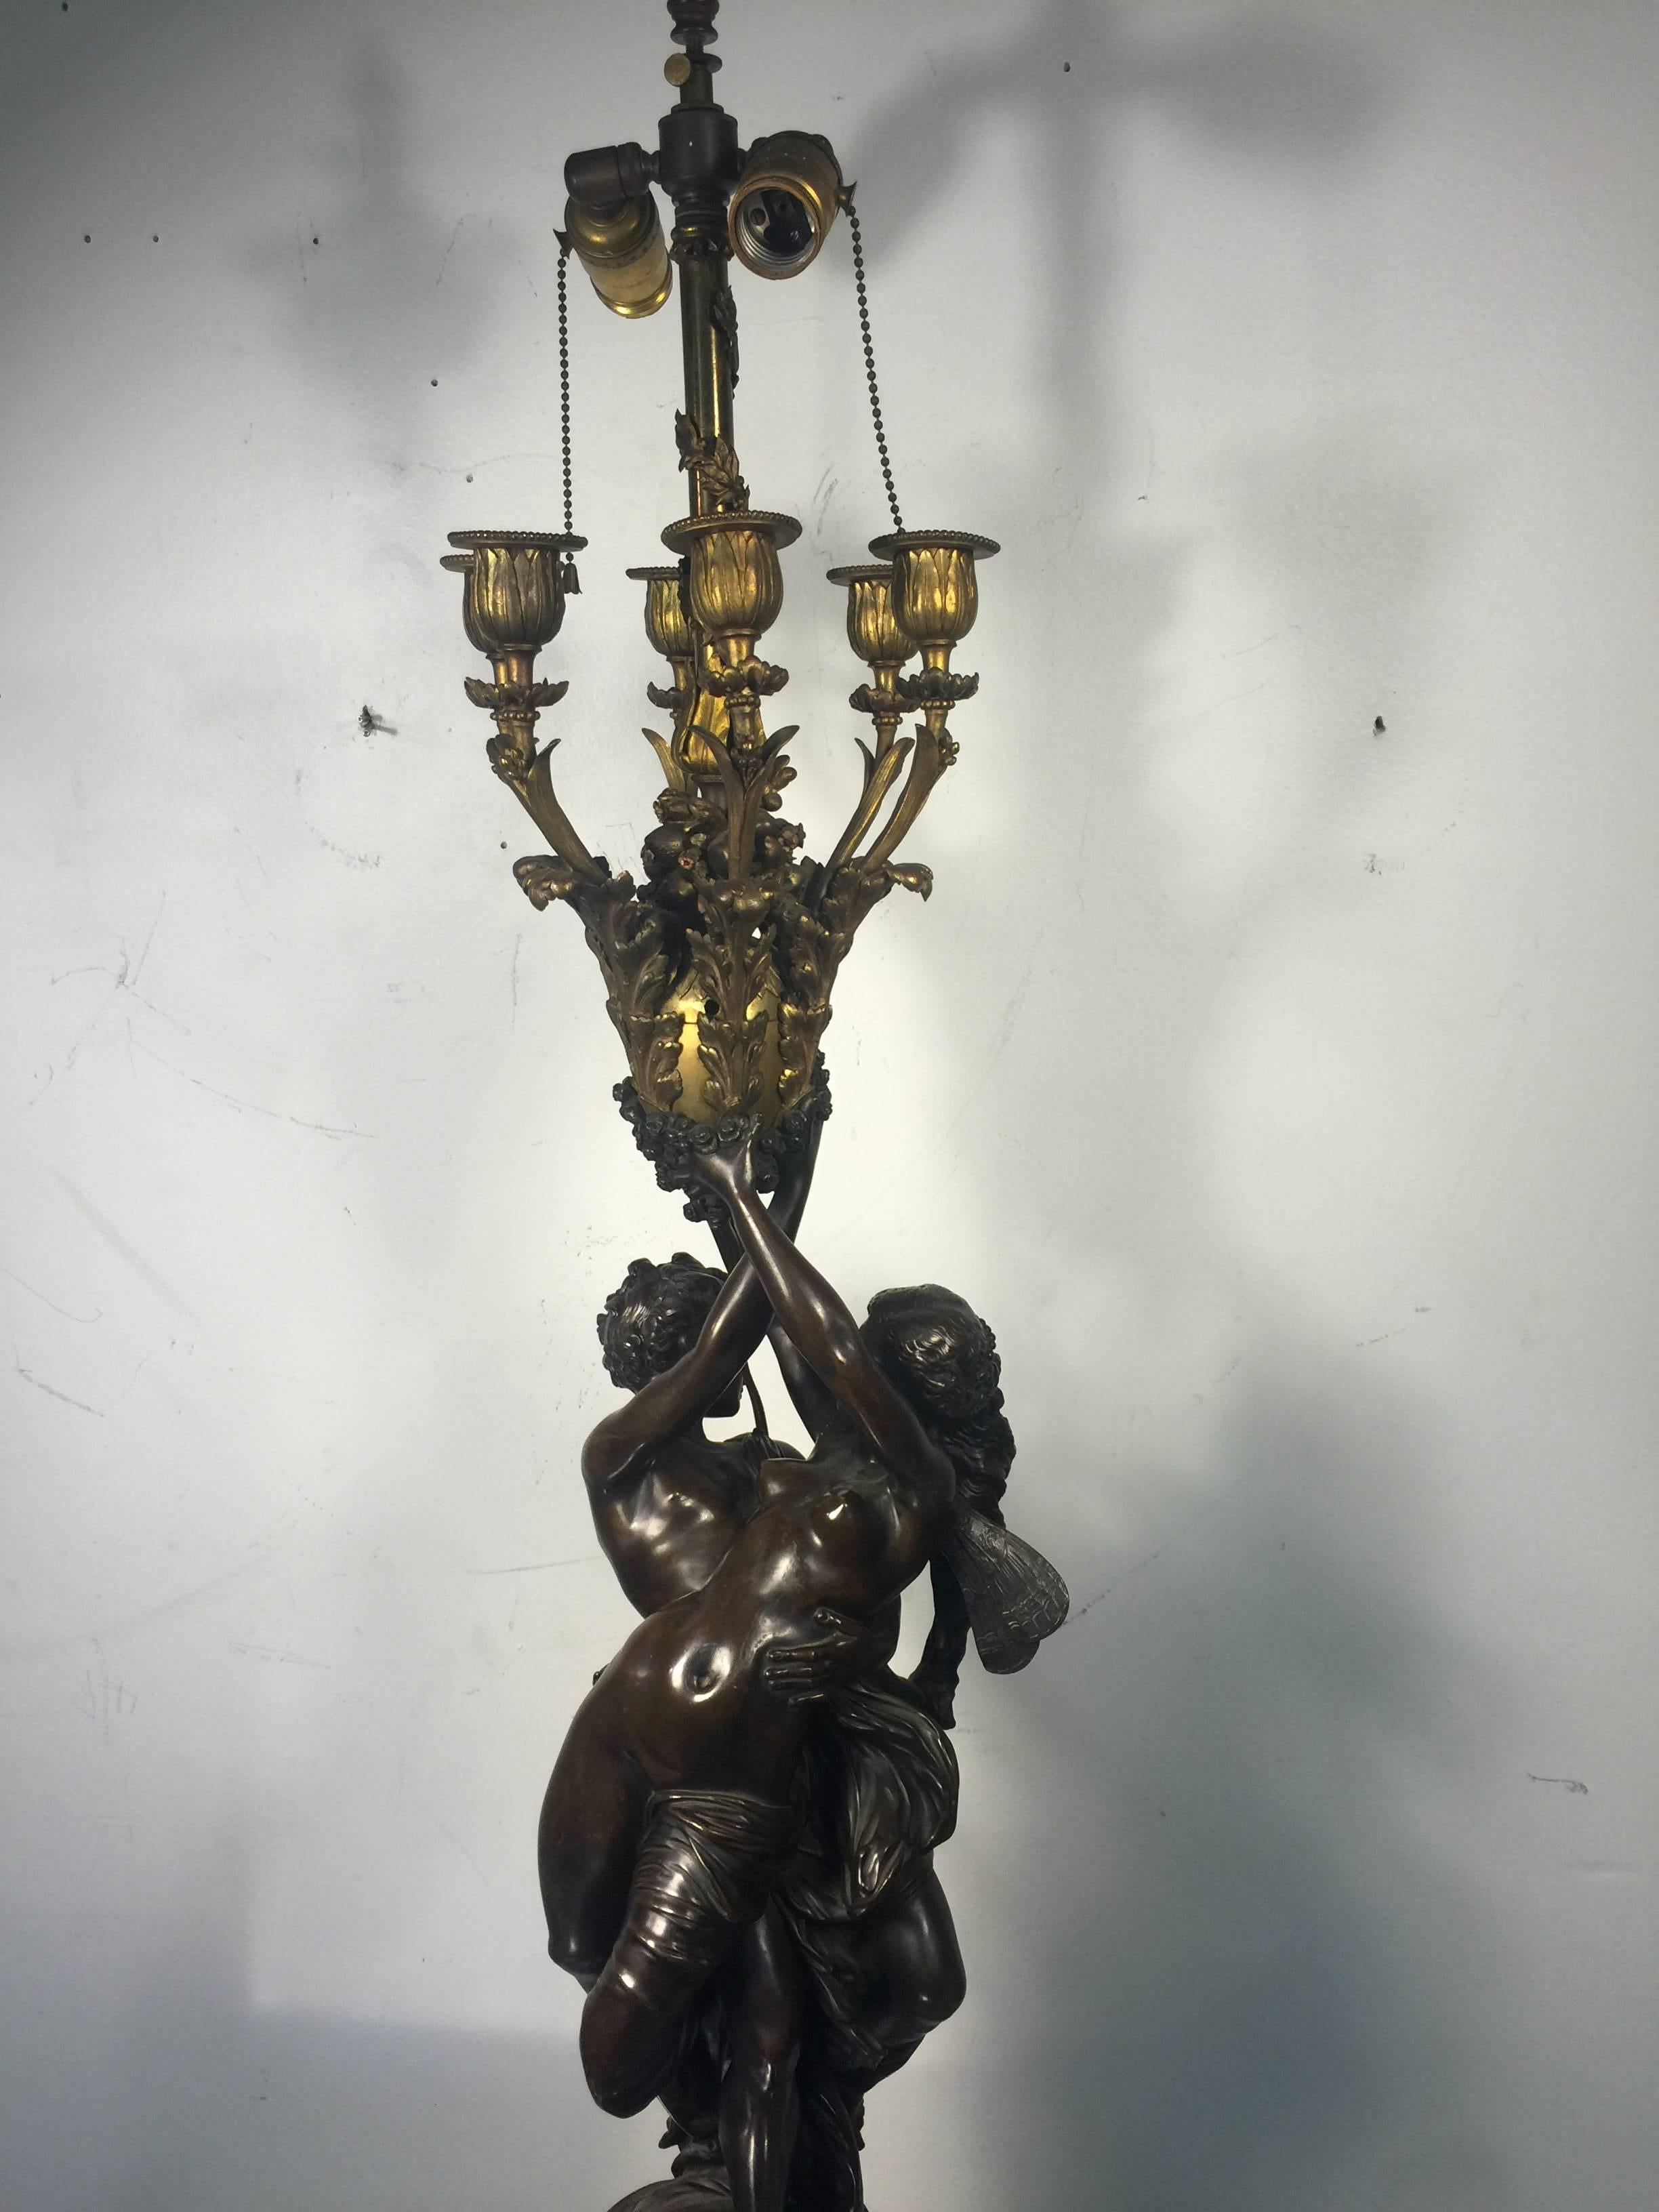 A monumental pair of 19th century, French, doré bronze Louis XV style figural six-light candelabra table lamps with exceptional detail. Good condition with age appropriate wear.